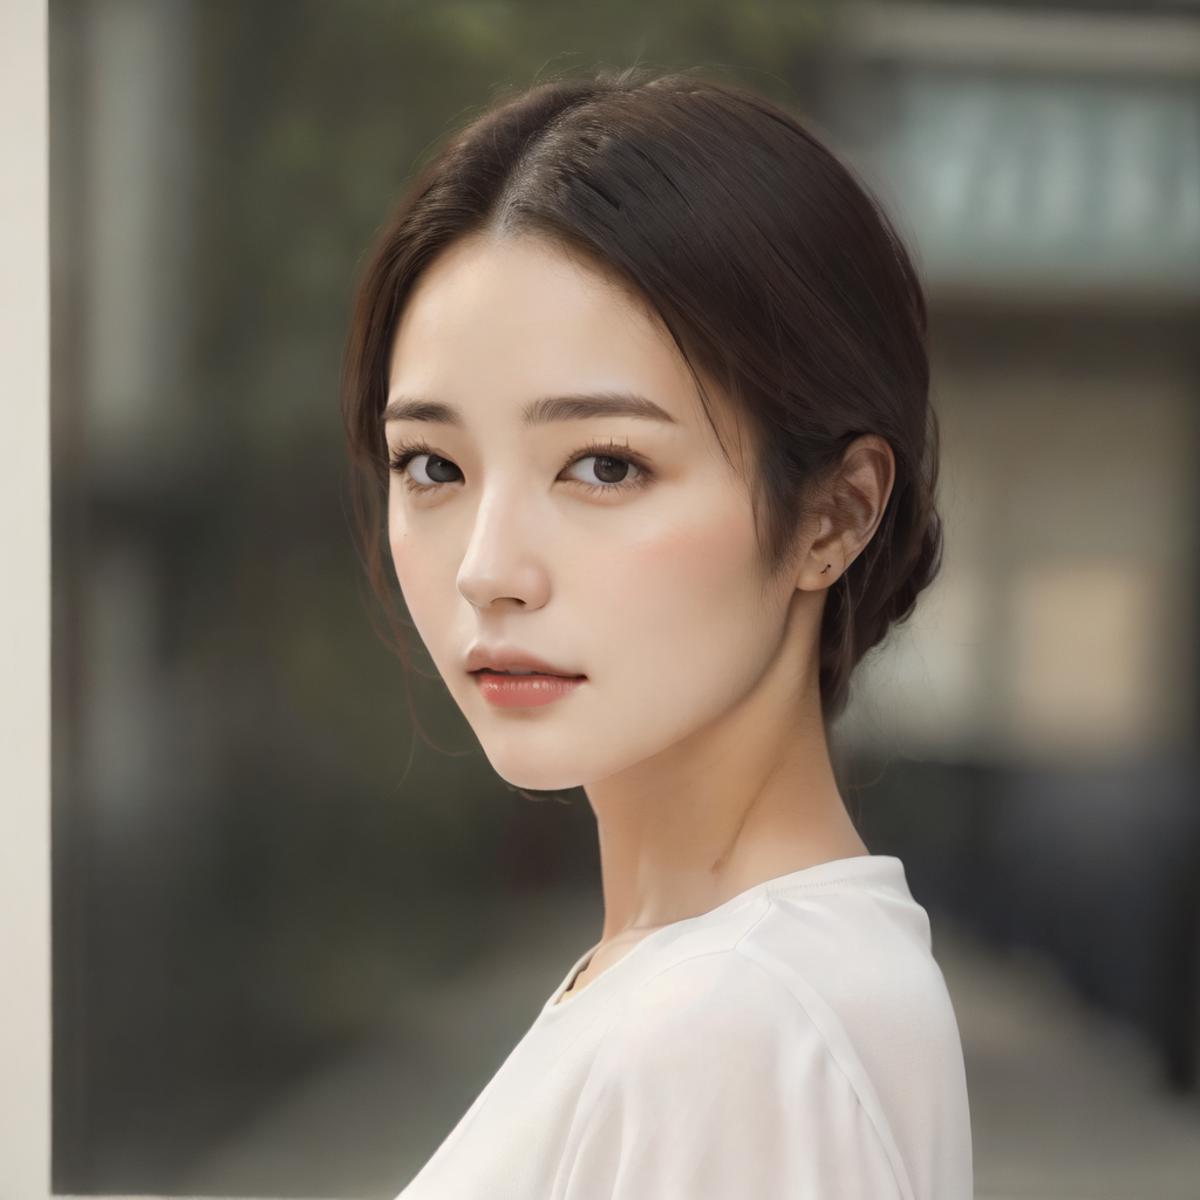 Douyin WeChat IG single person avatar generated LORA image by 26400504933